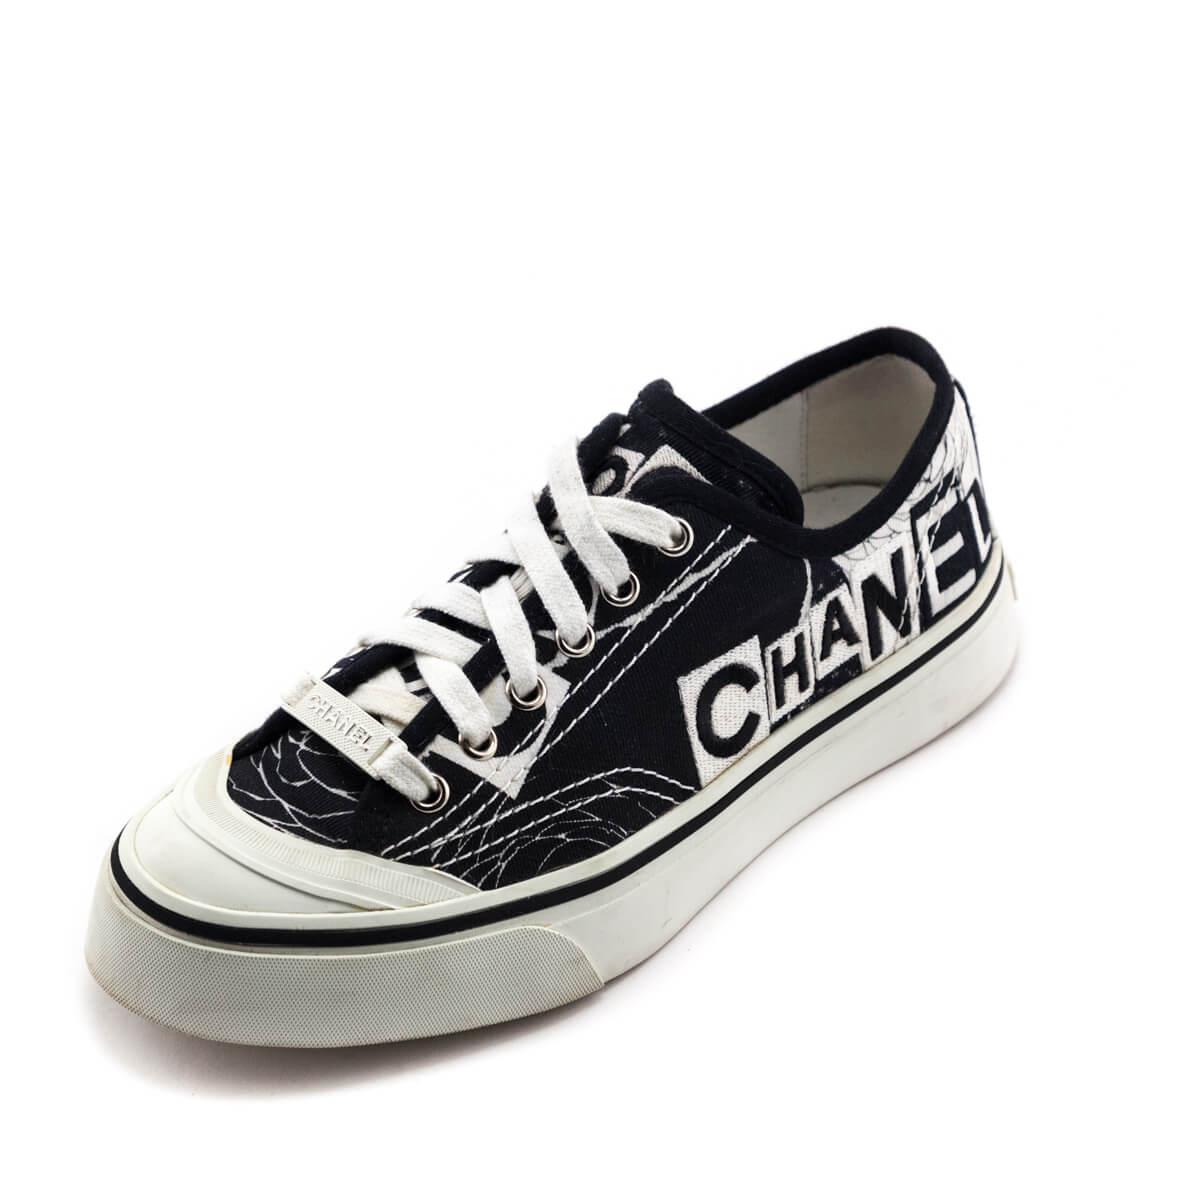 Chanel Black & White Canvas Printed Low Top Sneakers Size US 6.5 | EU 36.5